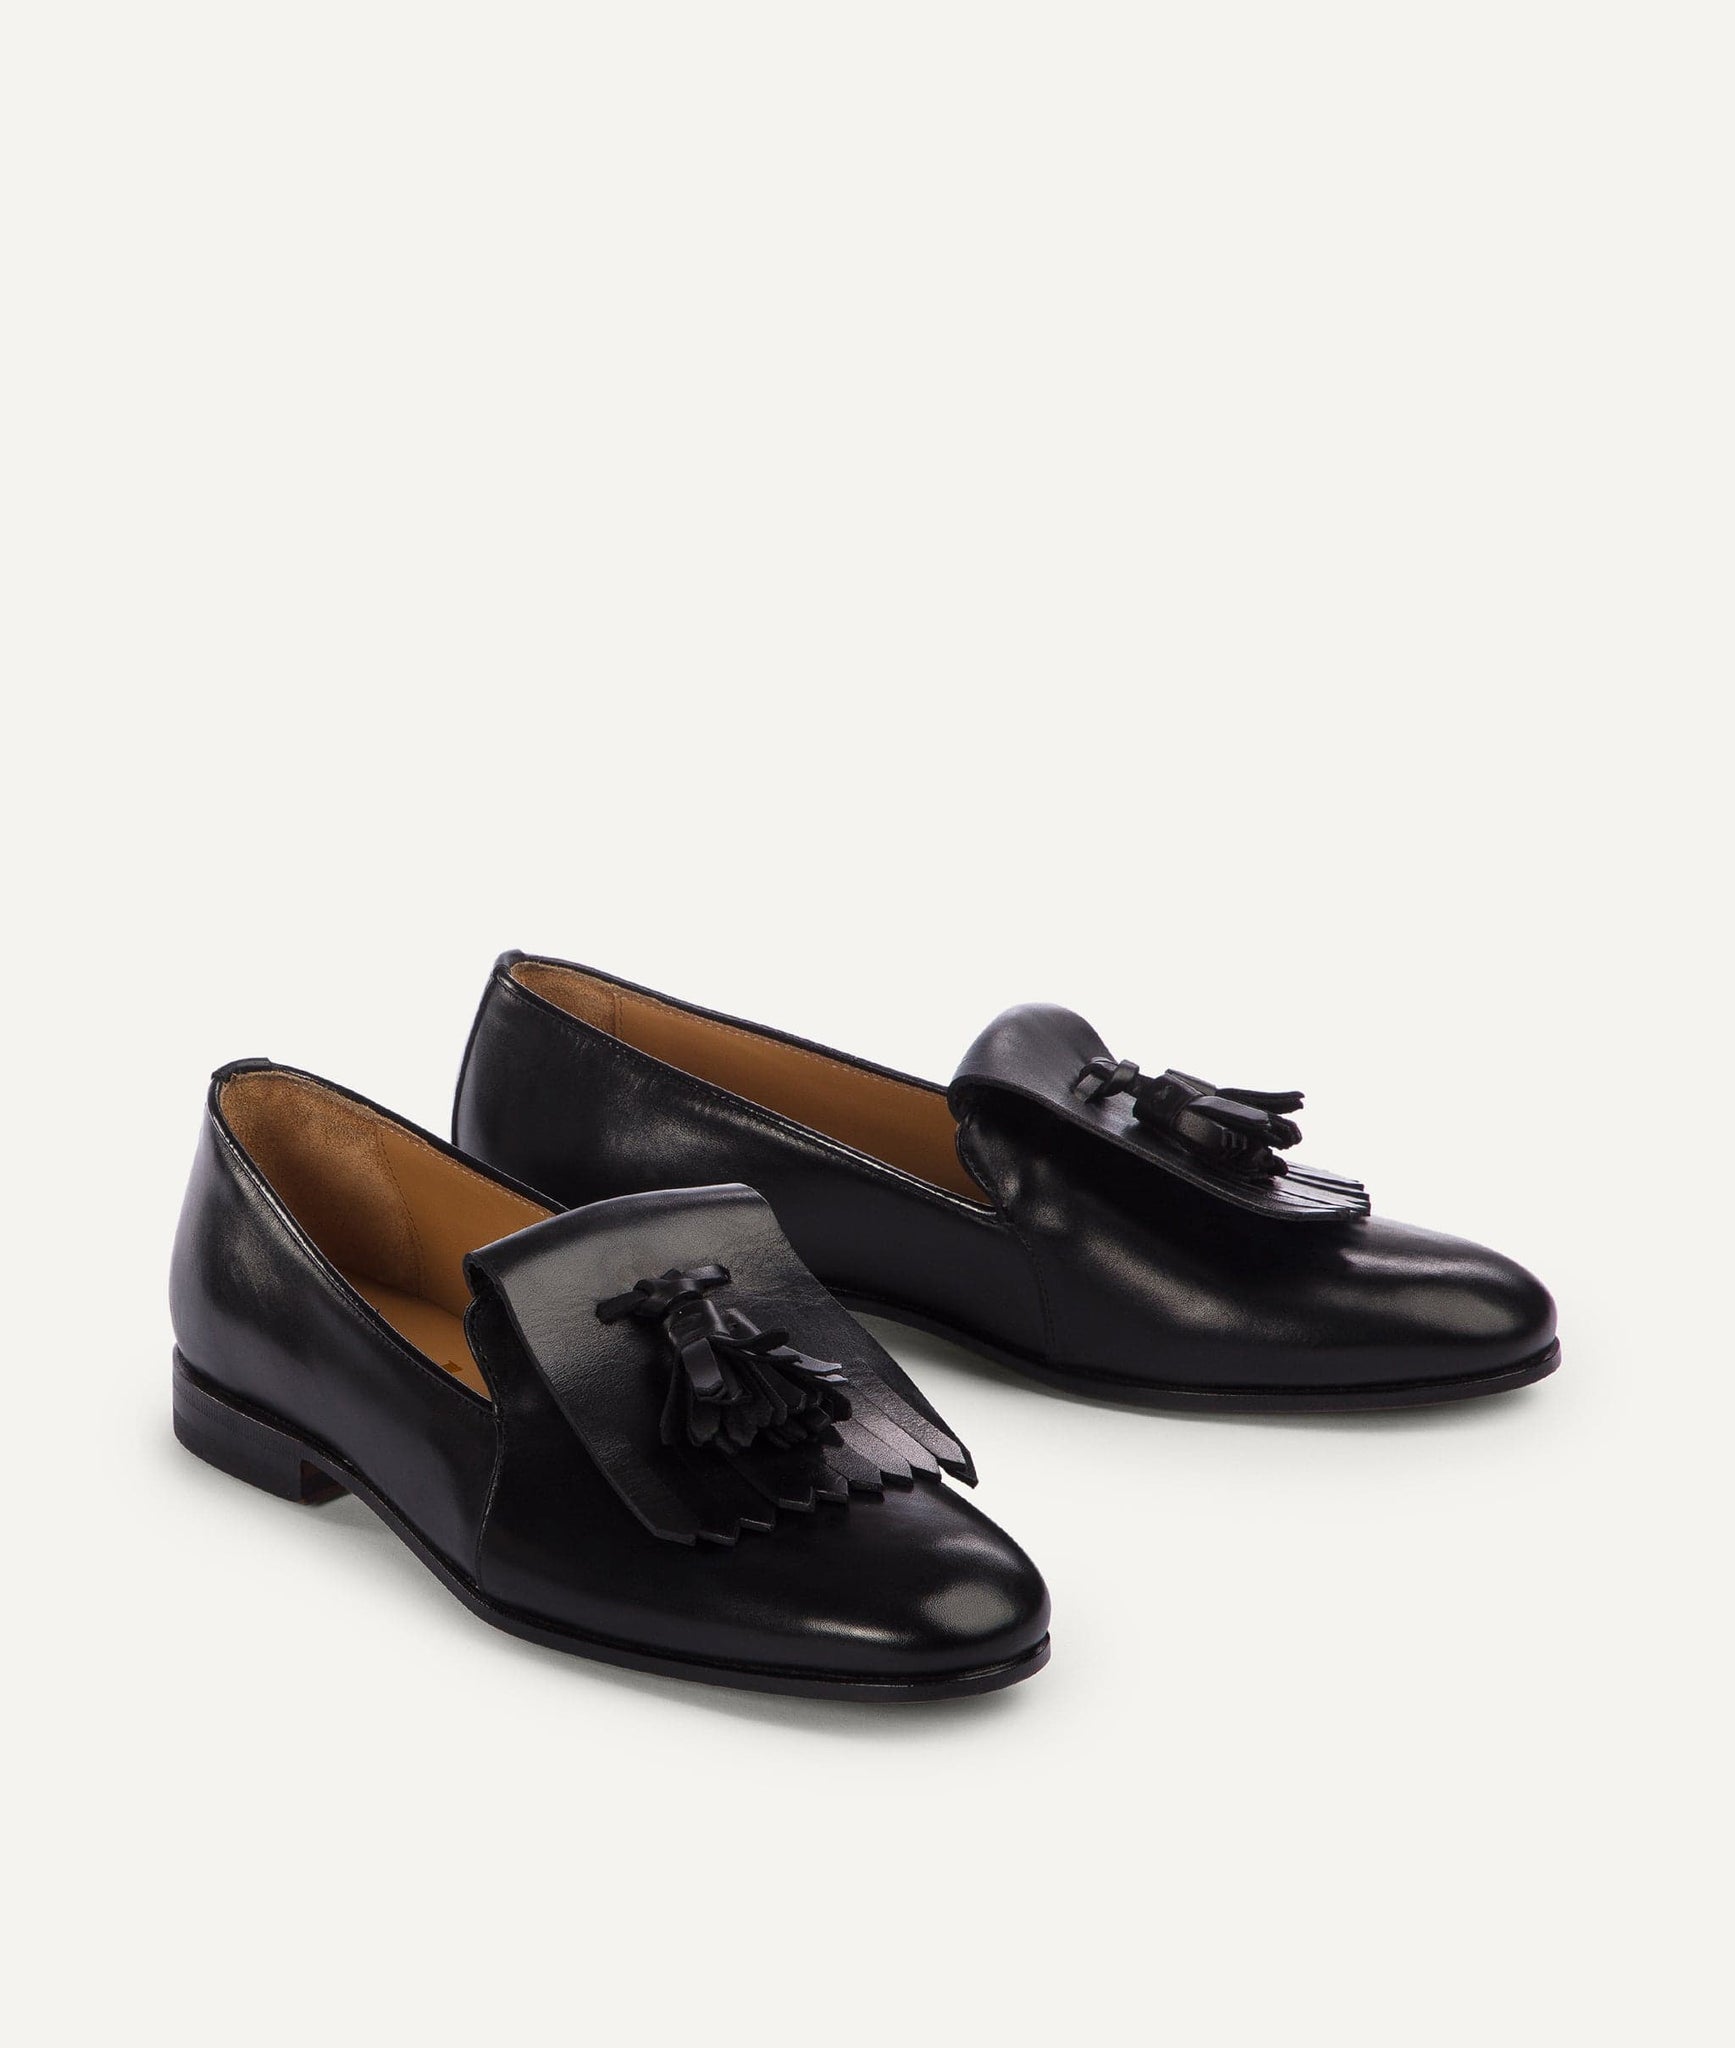 Loafer With Fringes in Calf Leather